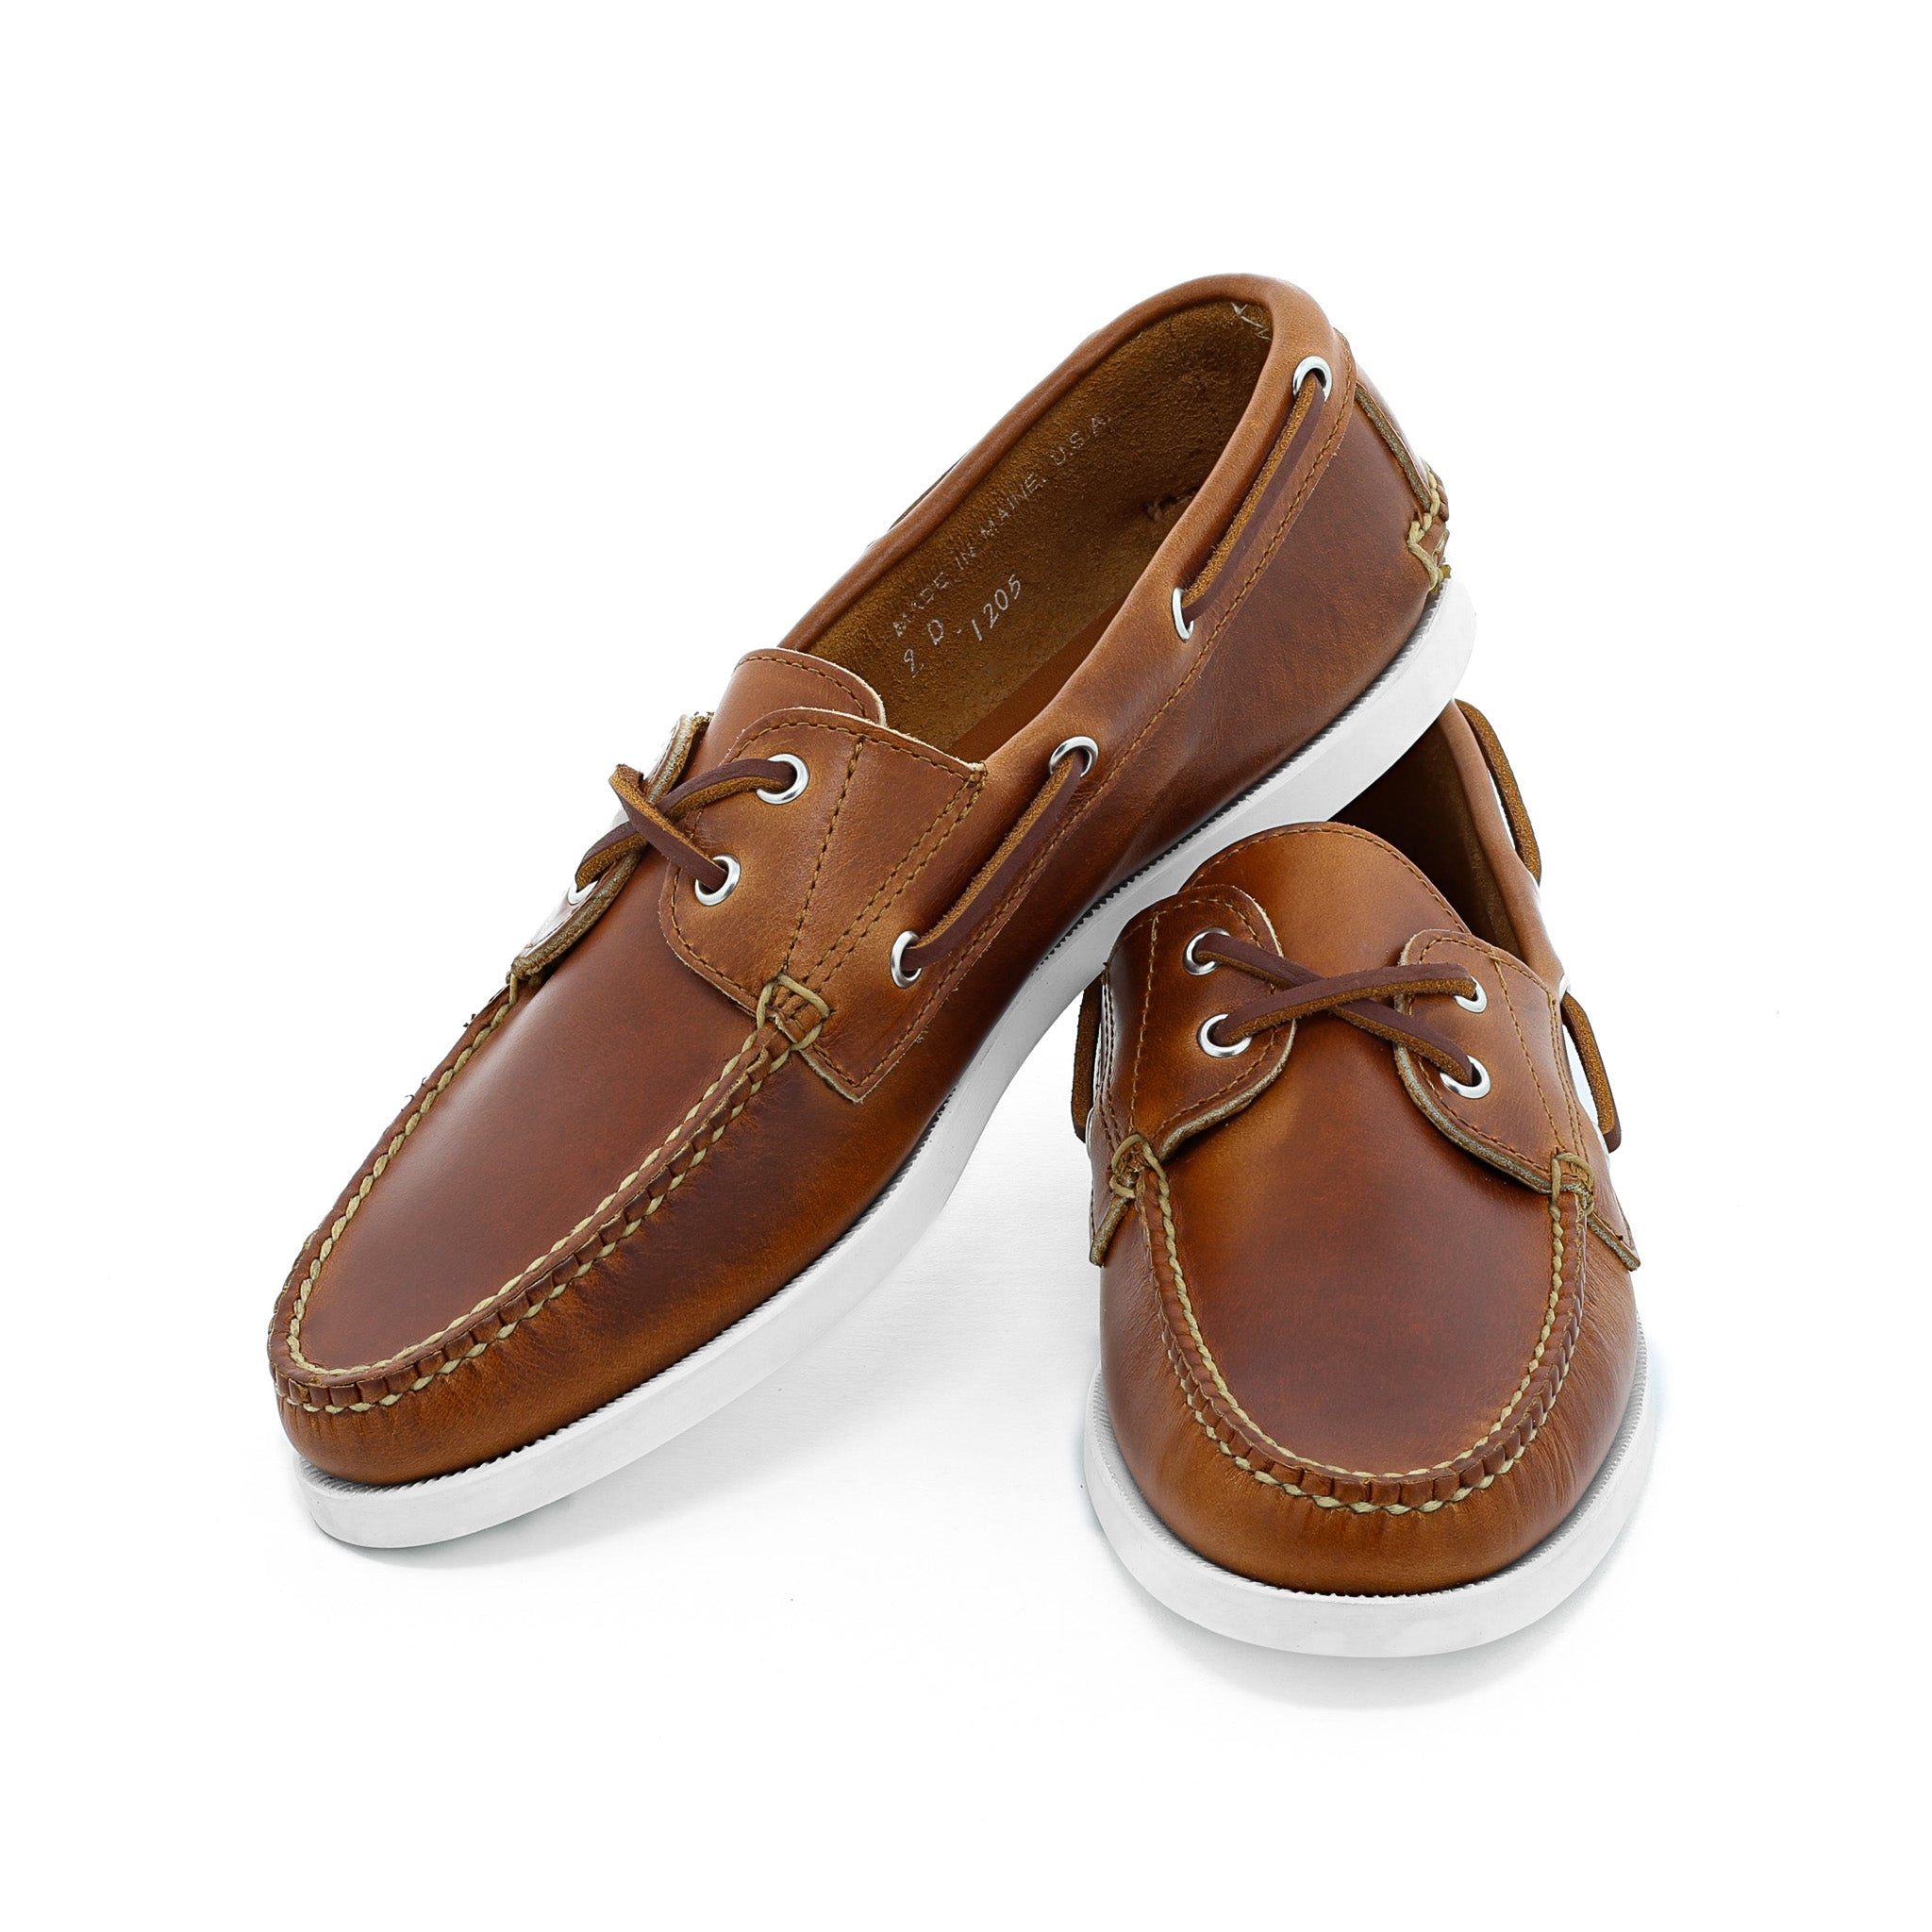 Styling Boat Shoes